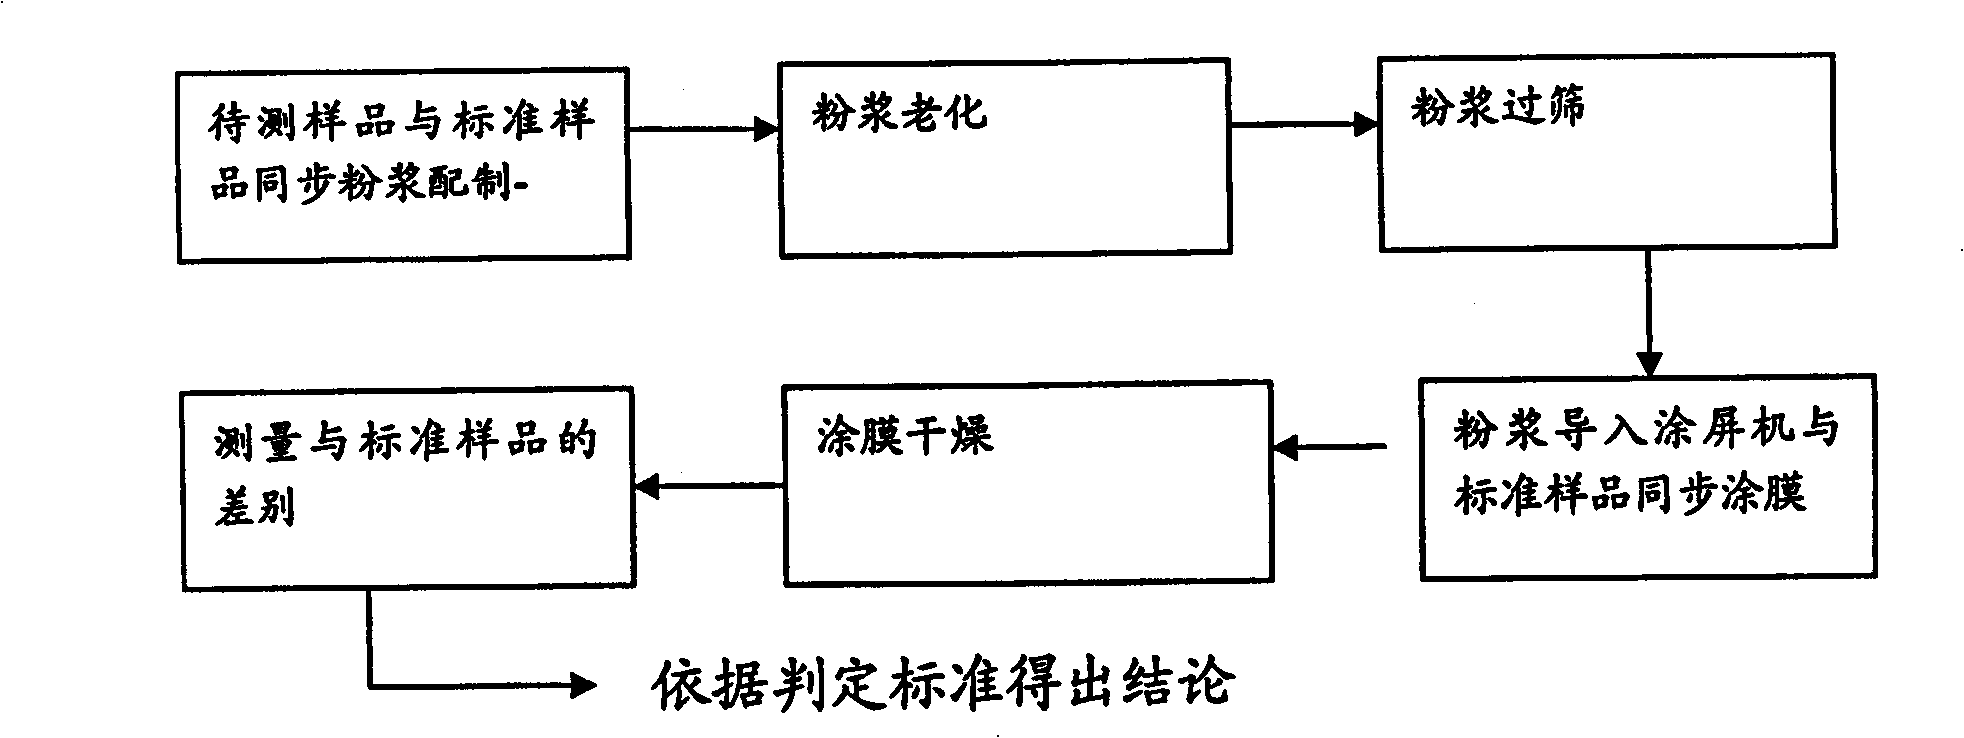 Method for testing fluorescent powder coated film characteristic by tricolor lamp